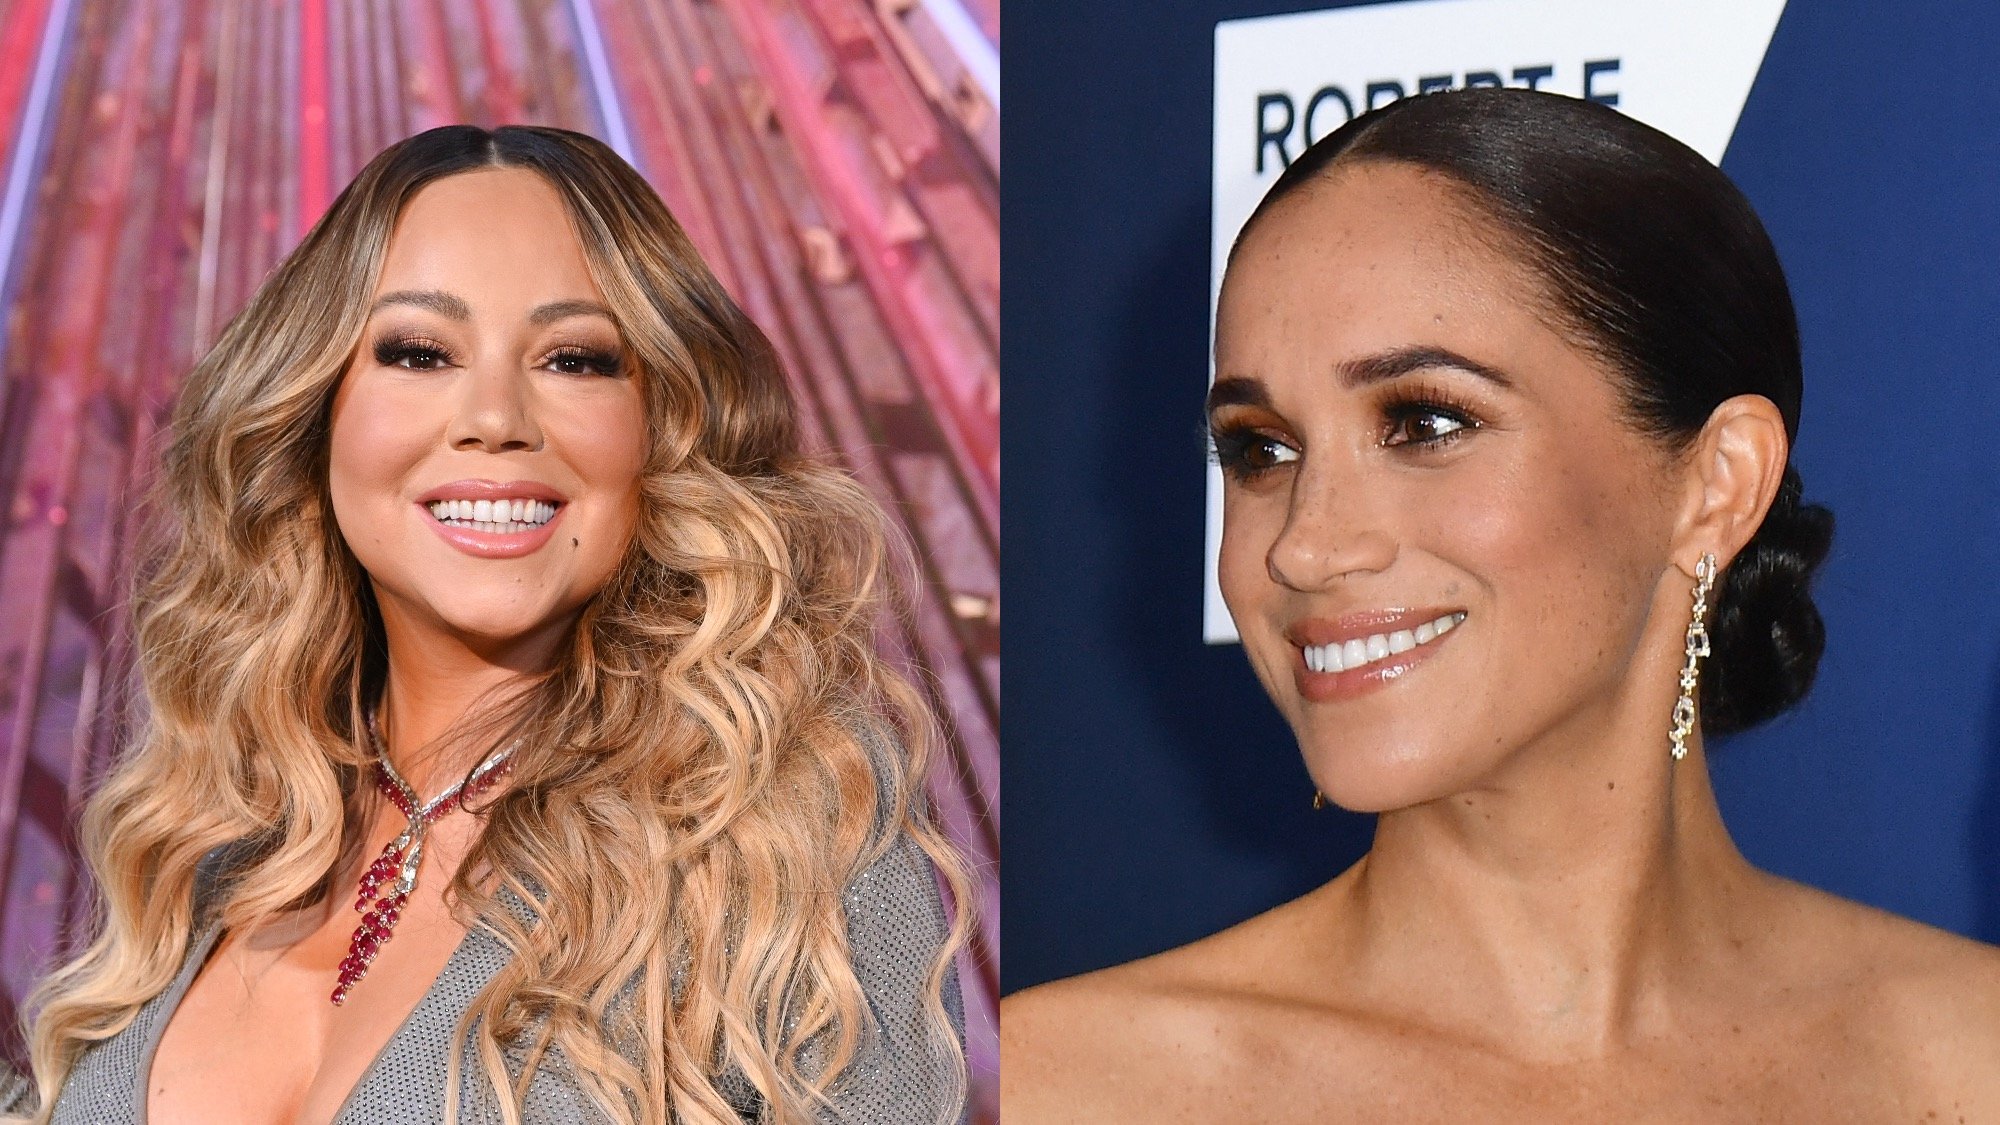 (L) Mariah Carey lights the Empire State Building in celebration of the 25th anniversary of "All I Want For Christmas Is You" at the Empire State Building on December 17, 2019. (R) Meghan, Duchess of Sussex, arrives at the 2022 Robert F. Kennedy Human Rights Ripple of Hope Award Gala at the Hilton Midtown in New York on December 6, 2022.